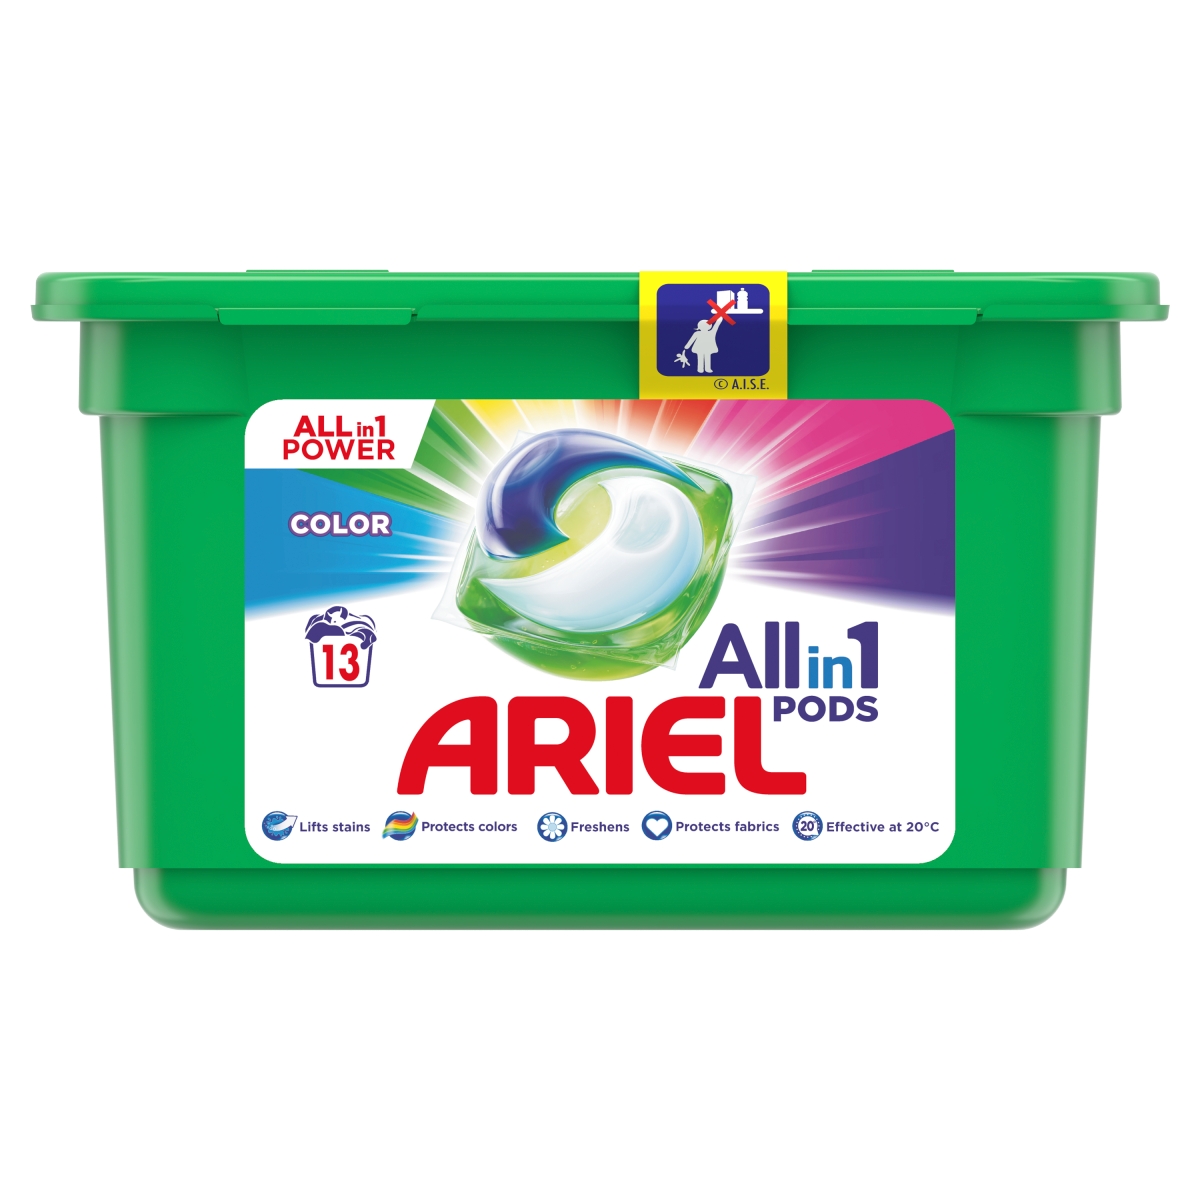 DETERGENT ARIEL PODS GEL CAPSULA ALL IN1 COLOR 13*23.8G